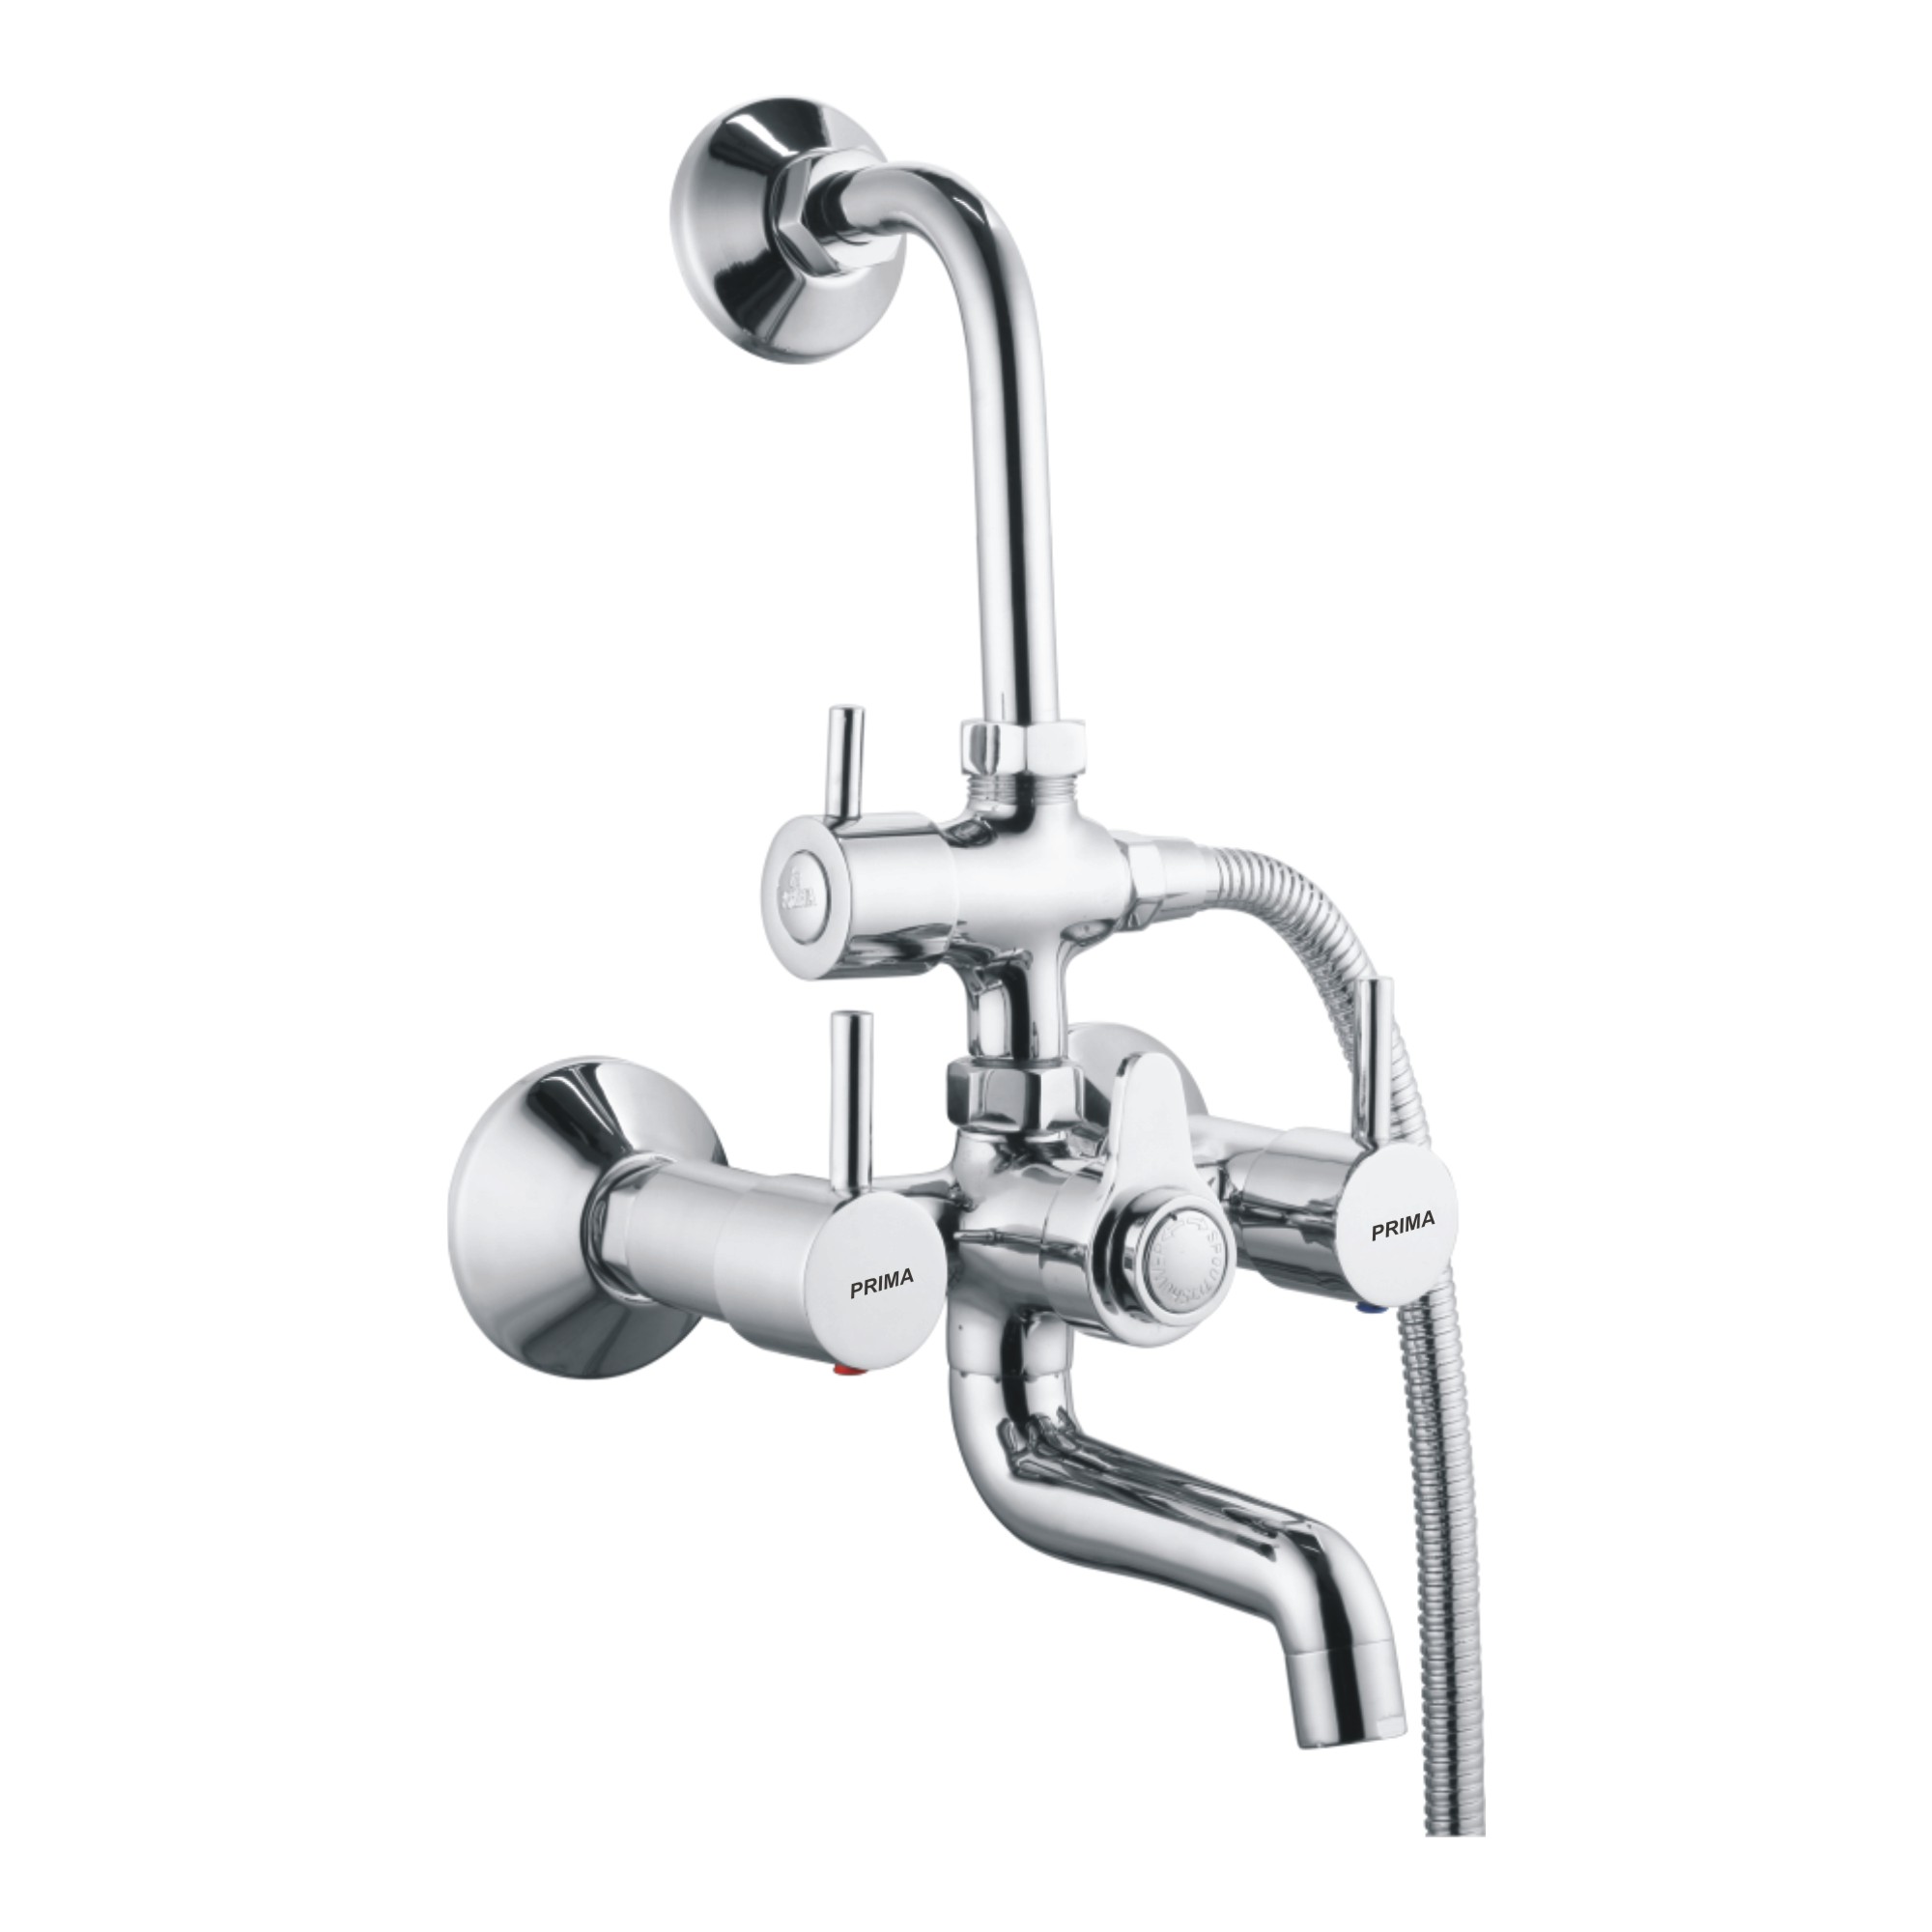 C.P Wall Mixer 3 in 1 System With Bend Set etc